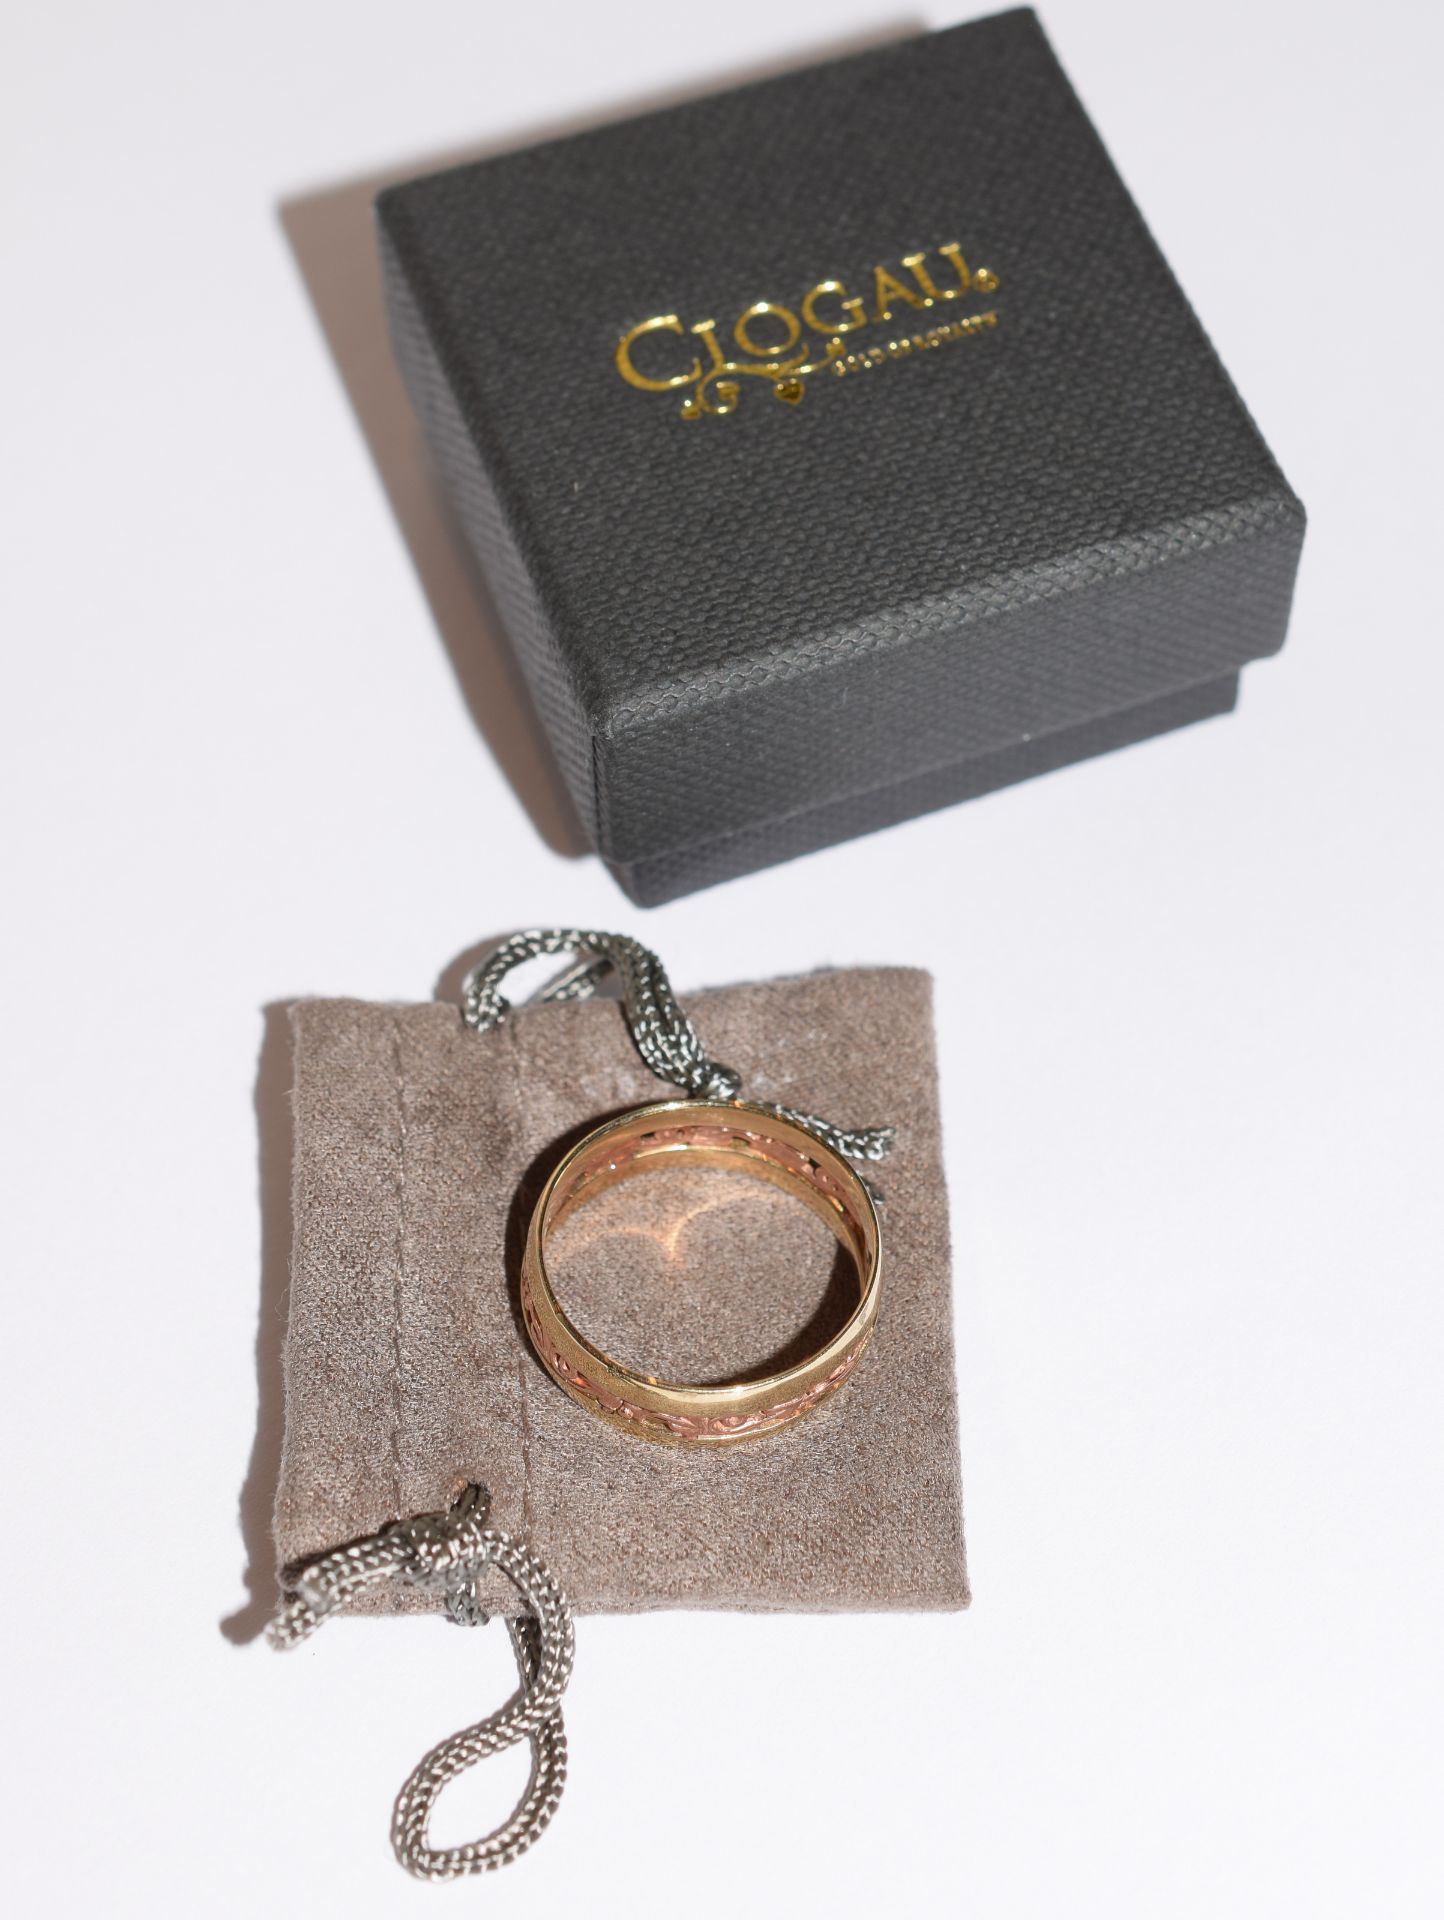 Clogau Two Colour 9ct Gold Ring With Tree Of Life Design - Image 2 of 4